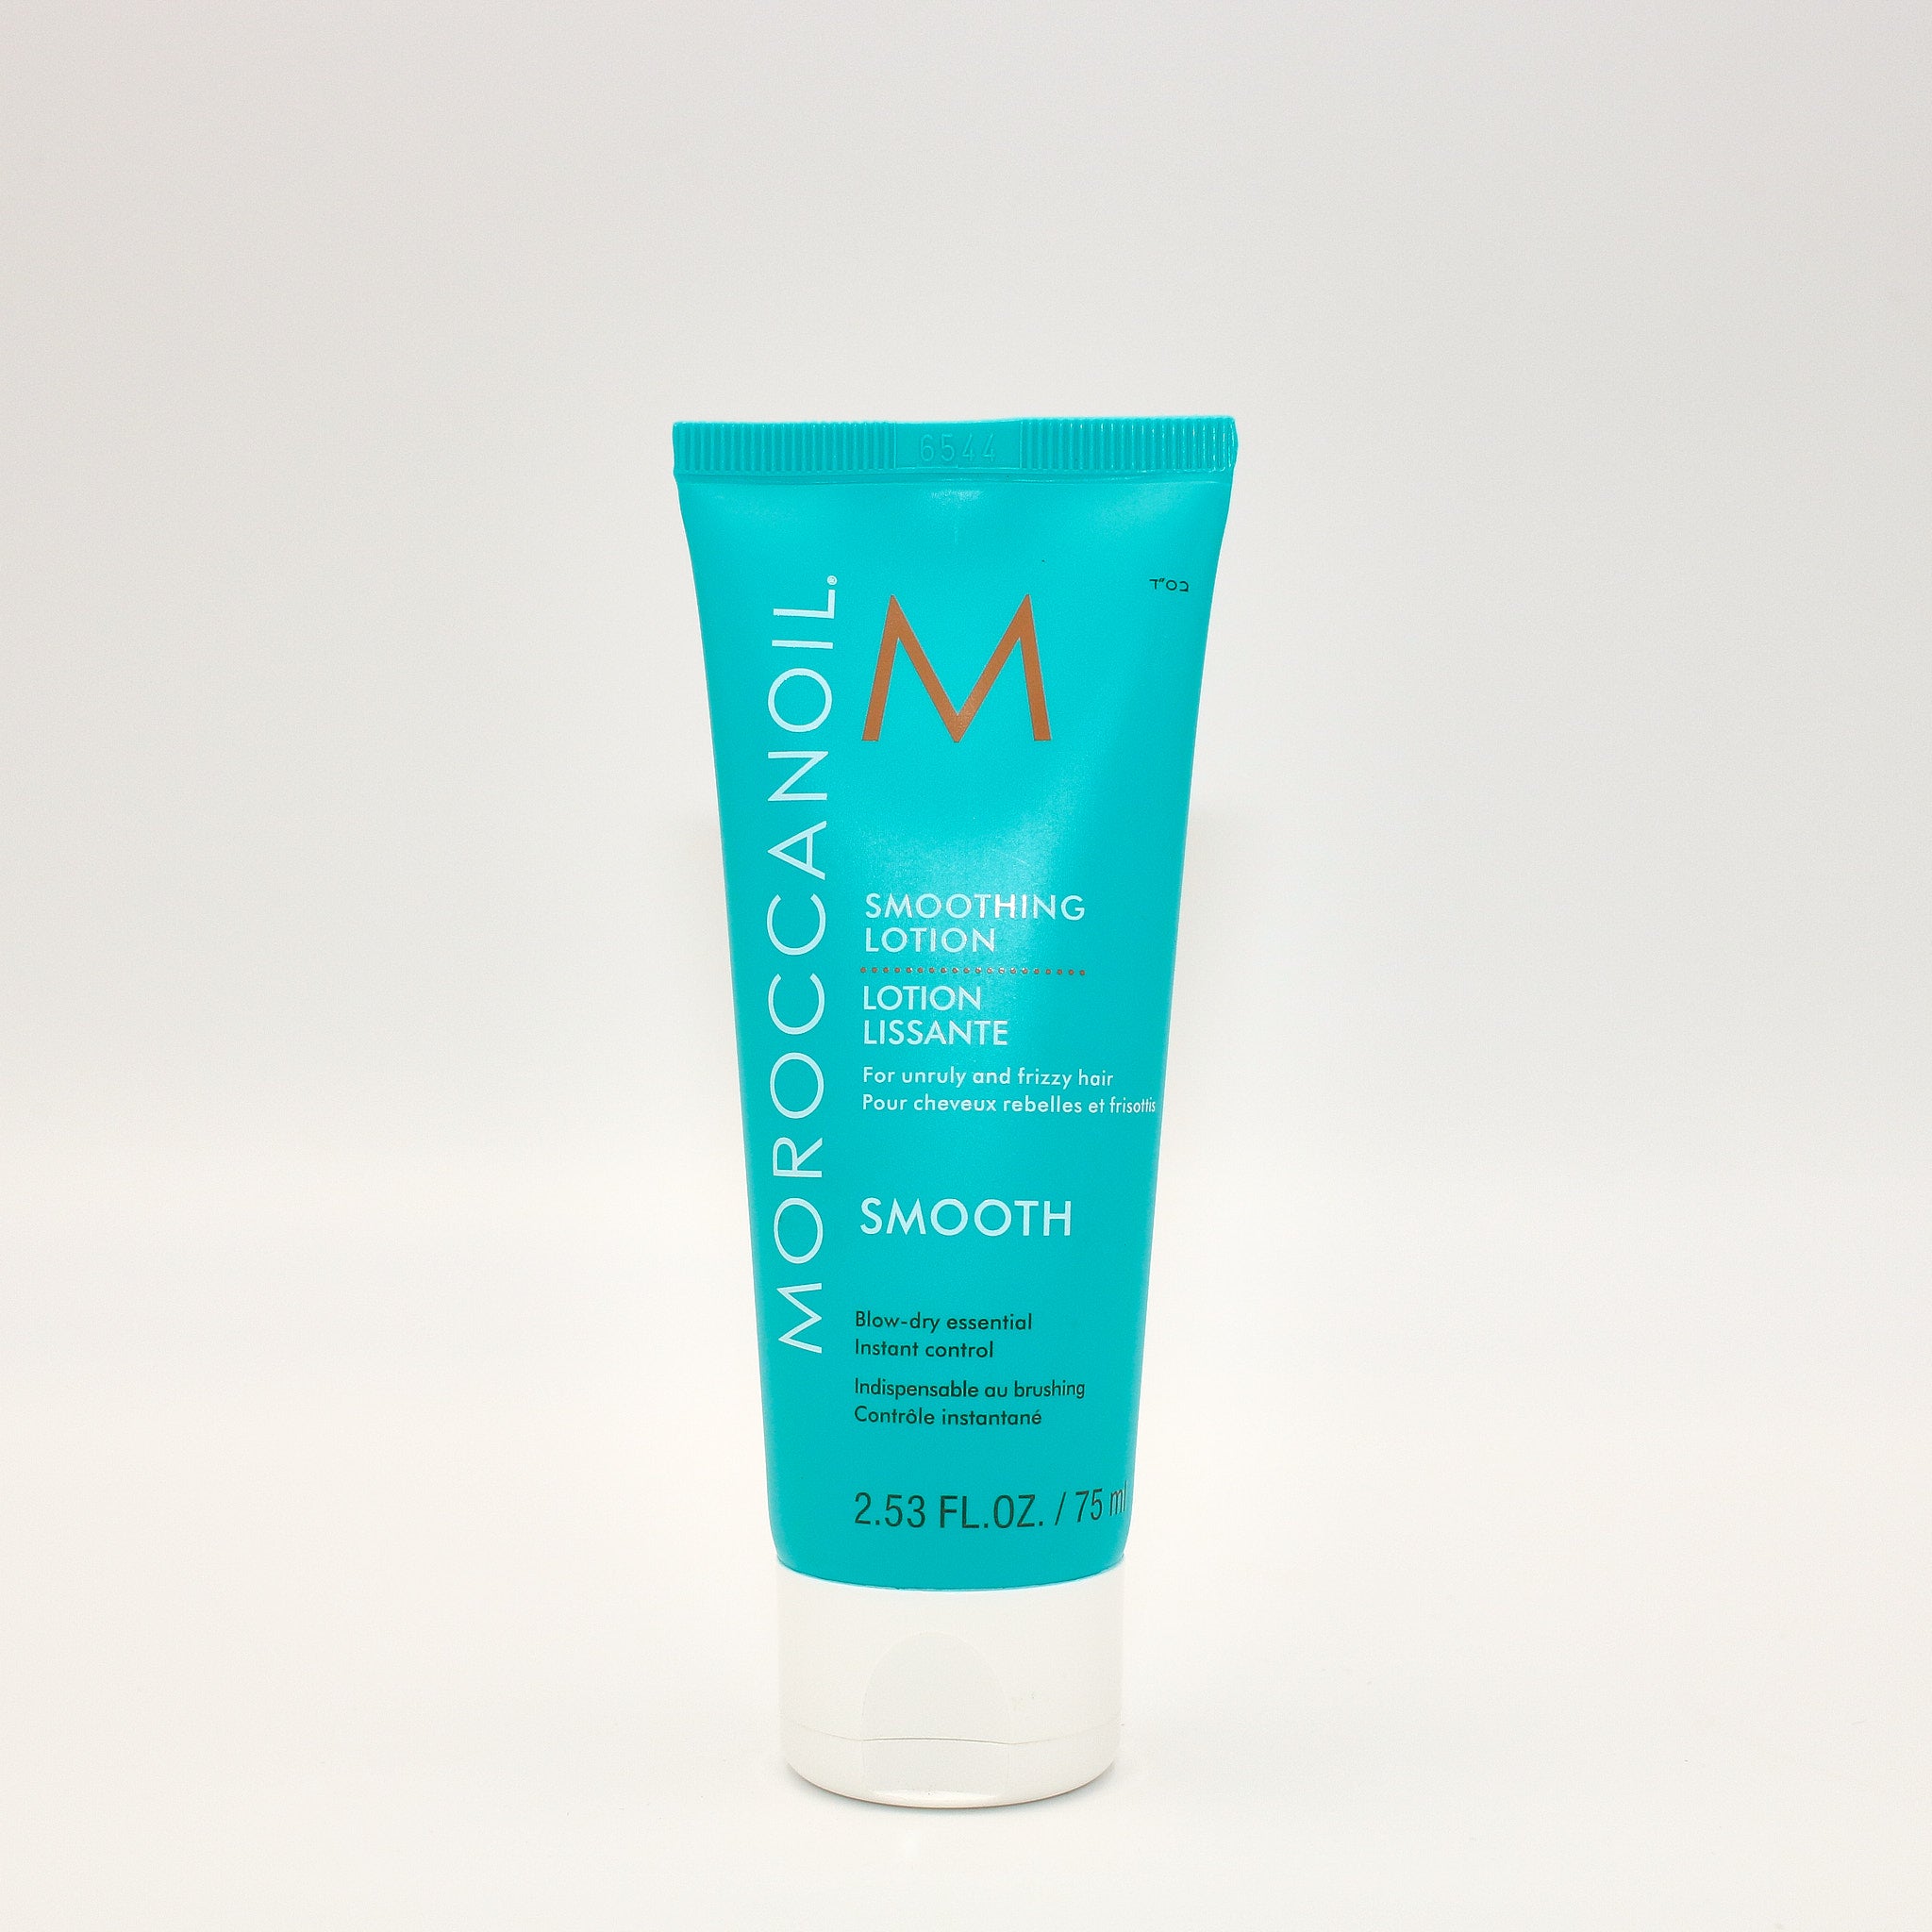 MOROCCAN OIL Smoothing Lotion 2.53 oz